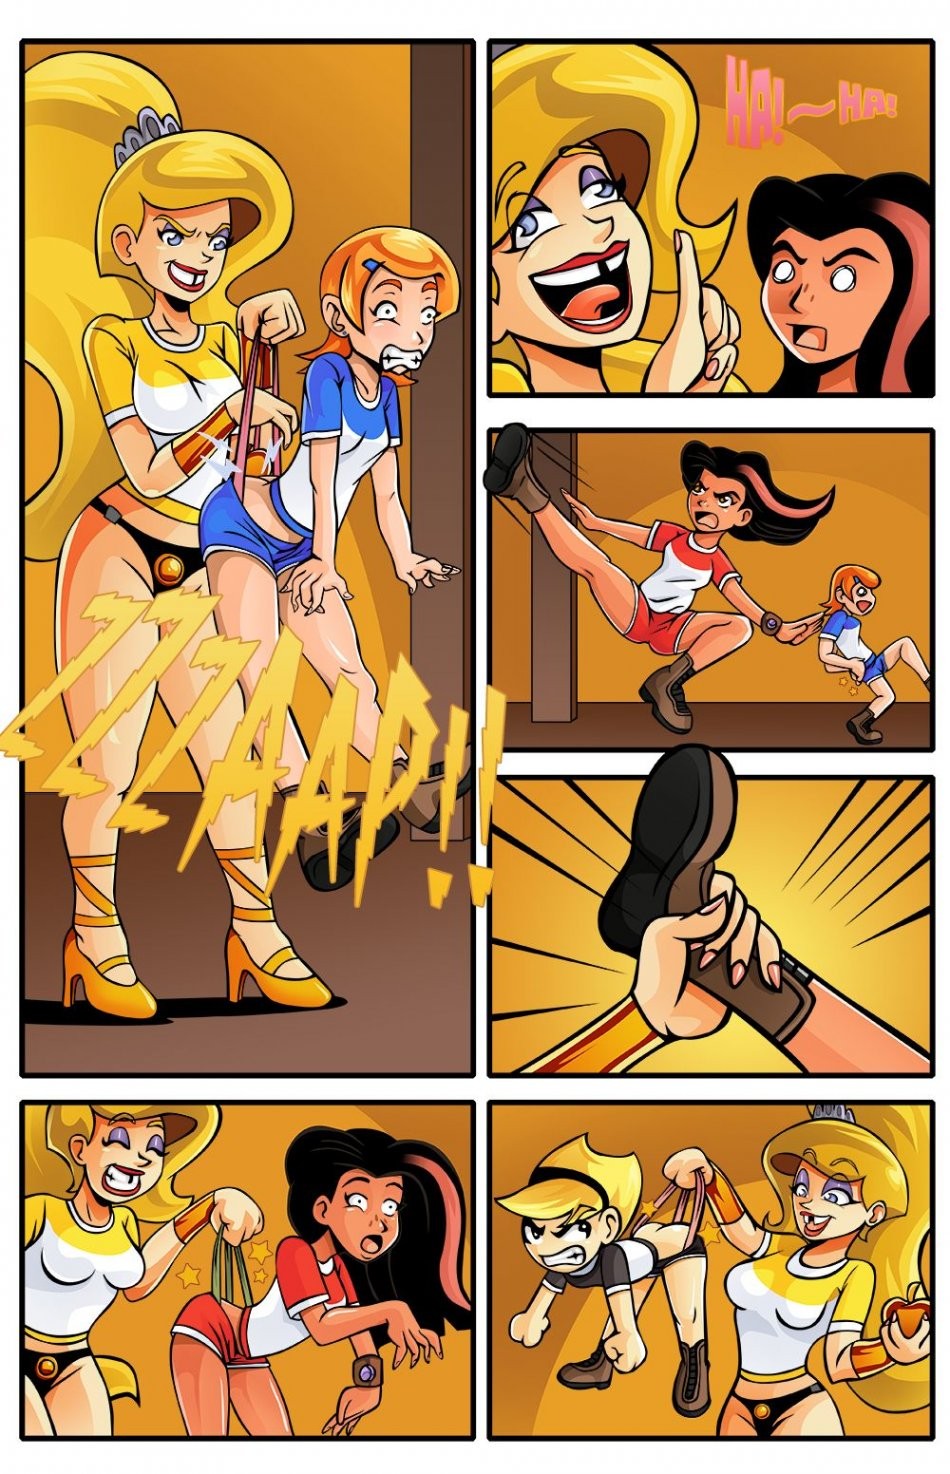 Camp Woody - Camp Chaos porn comic picture 10